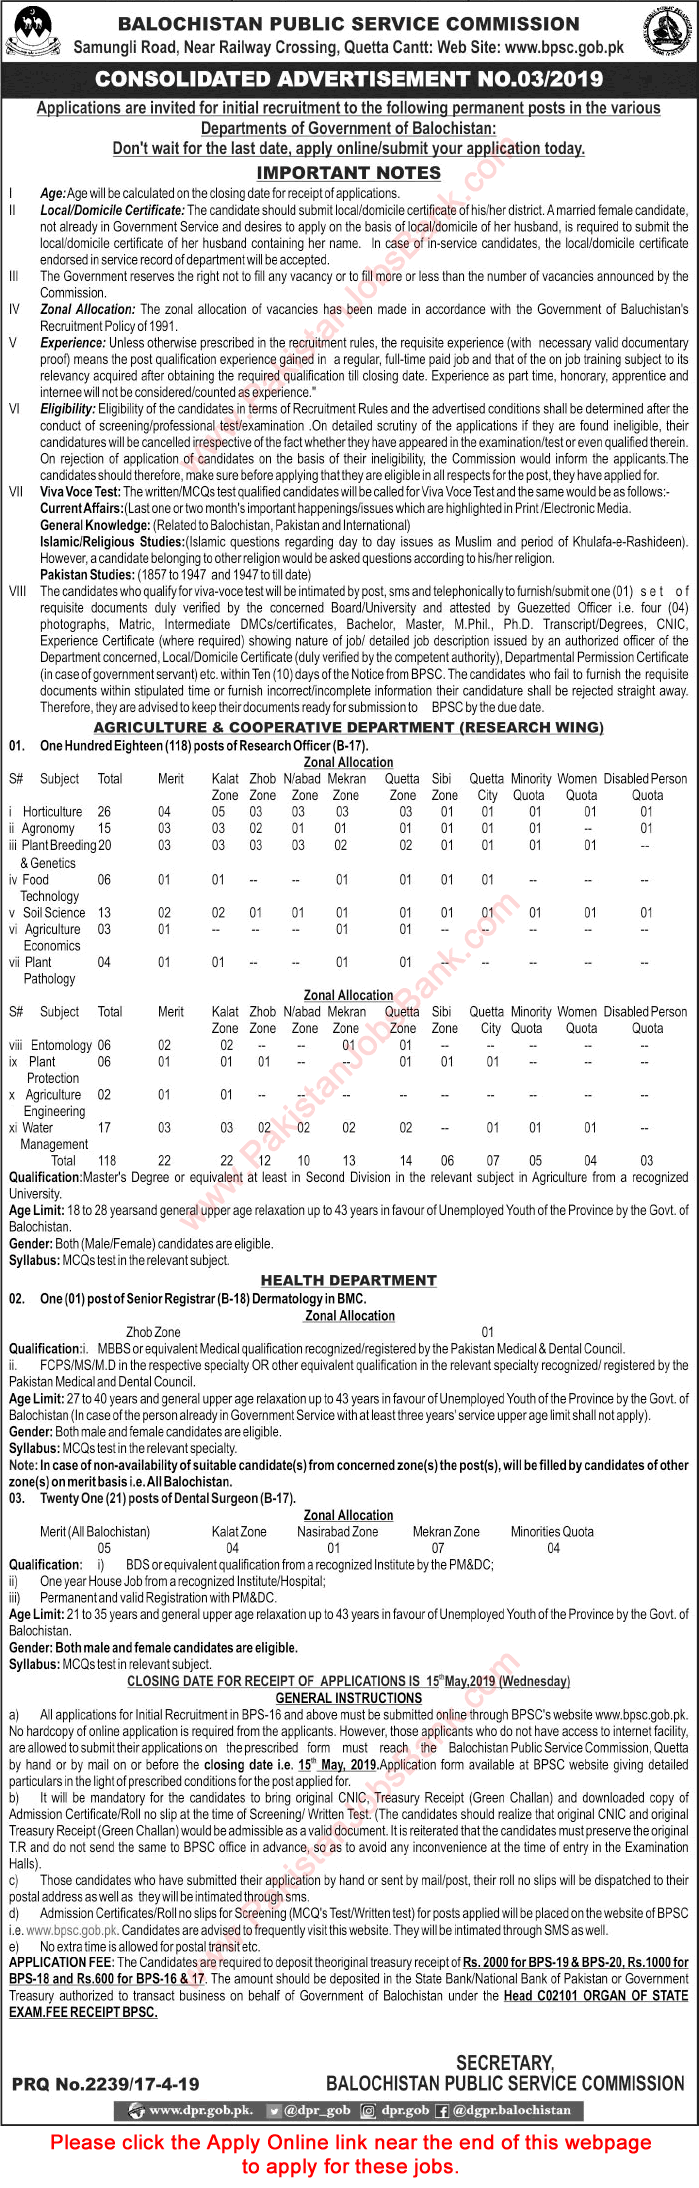 BPSC Jobs Apply 2019 Apply Online Consolidated Advertisement No 03/2019 3/2019 Latest